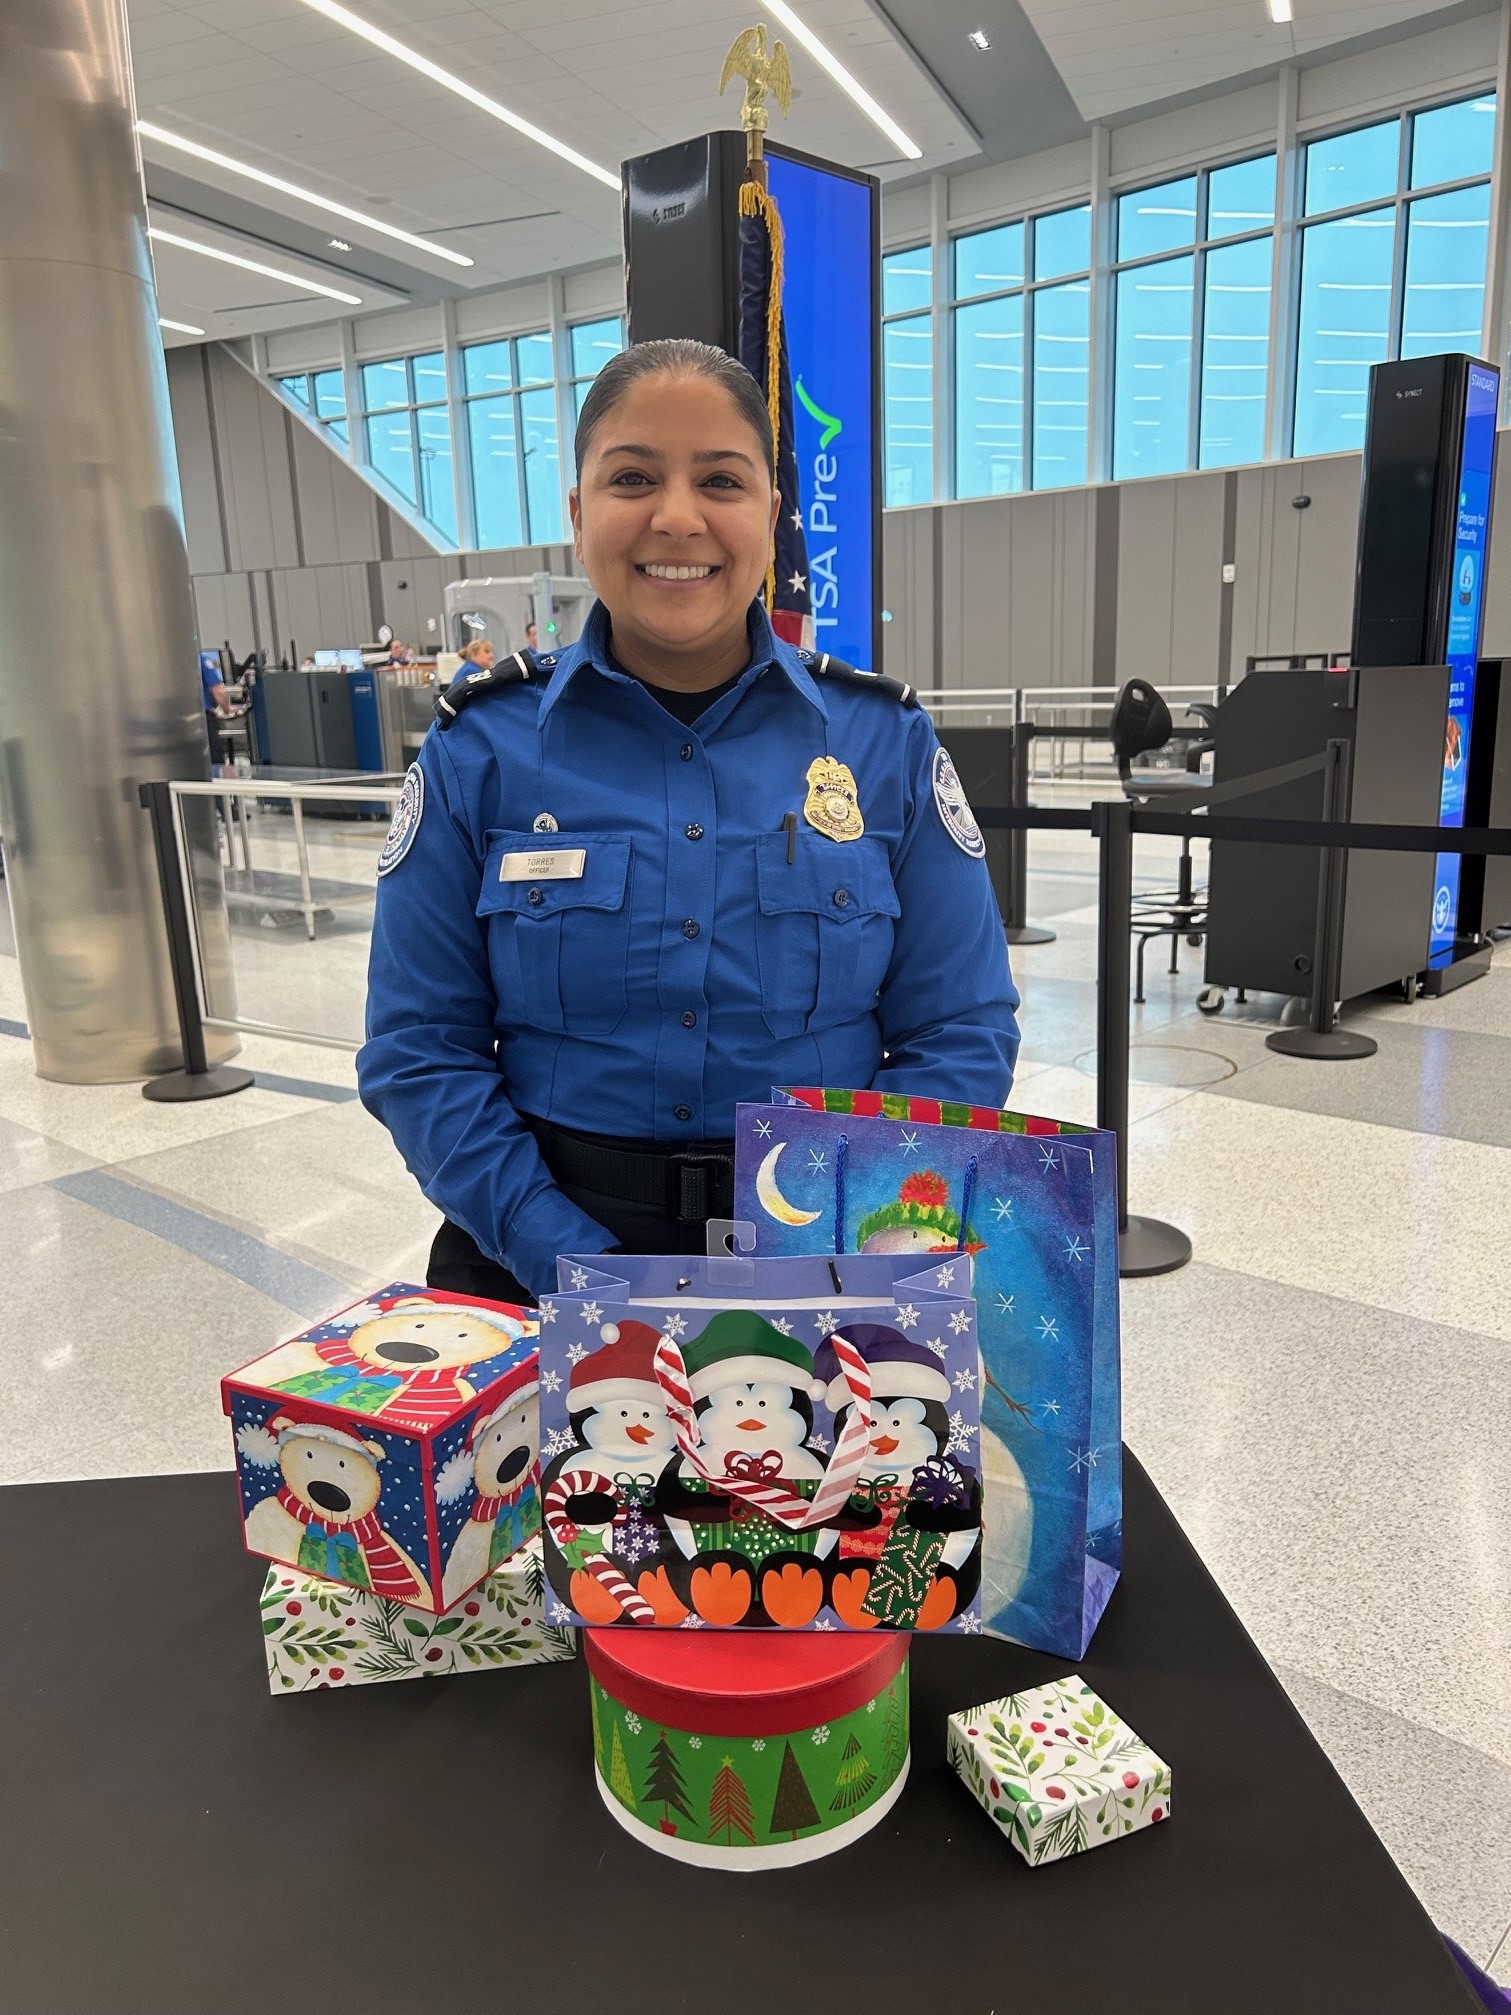 Use of gift boxes and gift bags are recommended for traveling with gifts. (TSA photo)